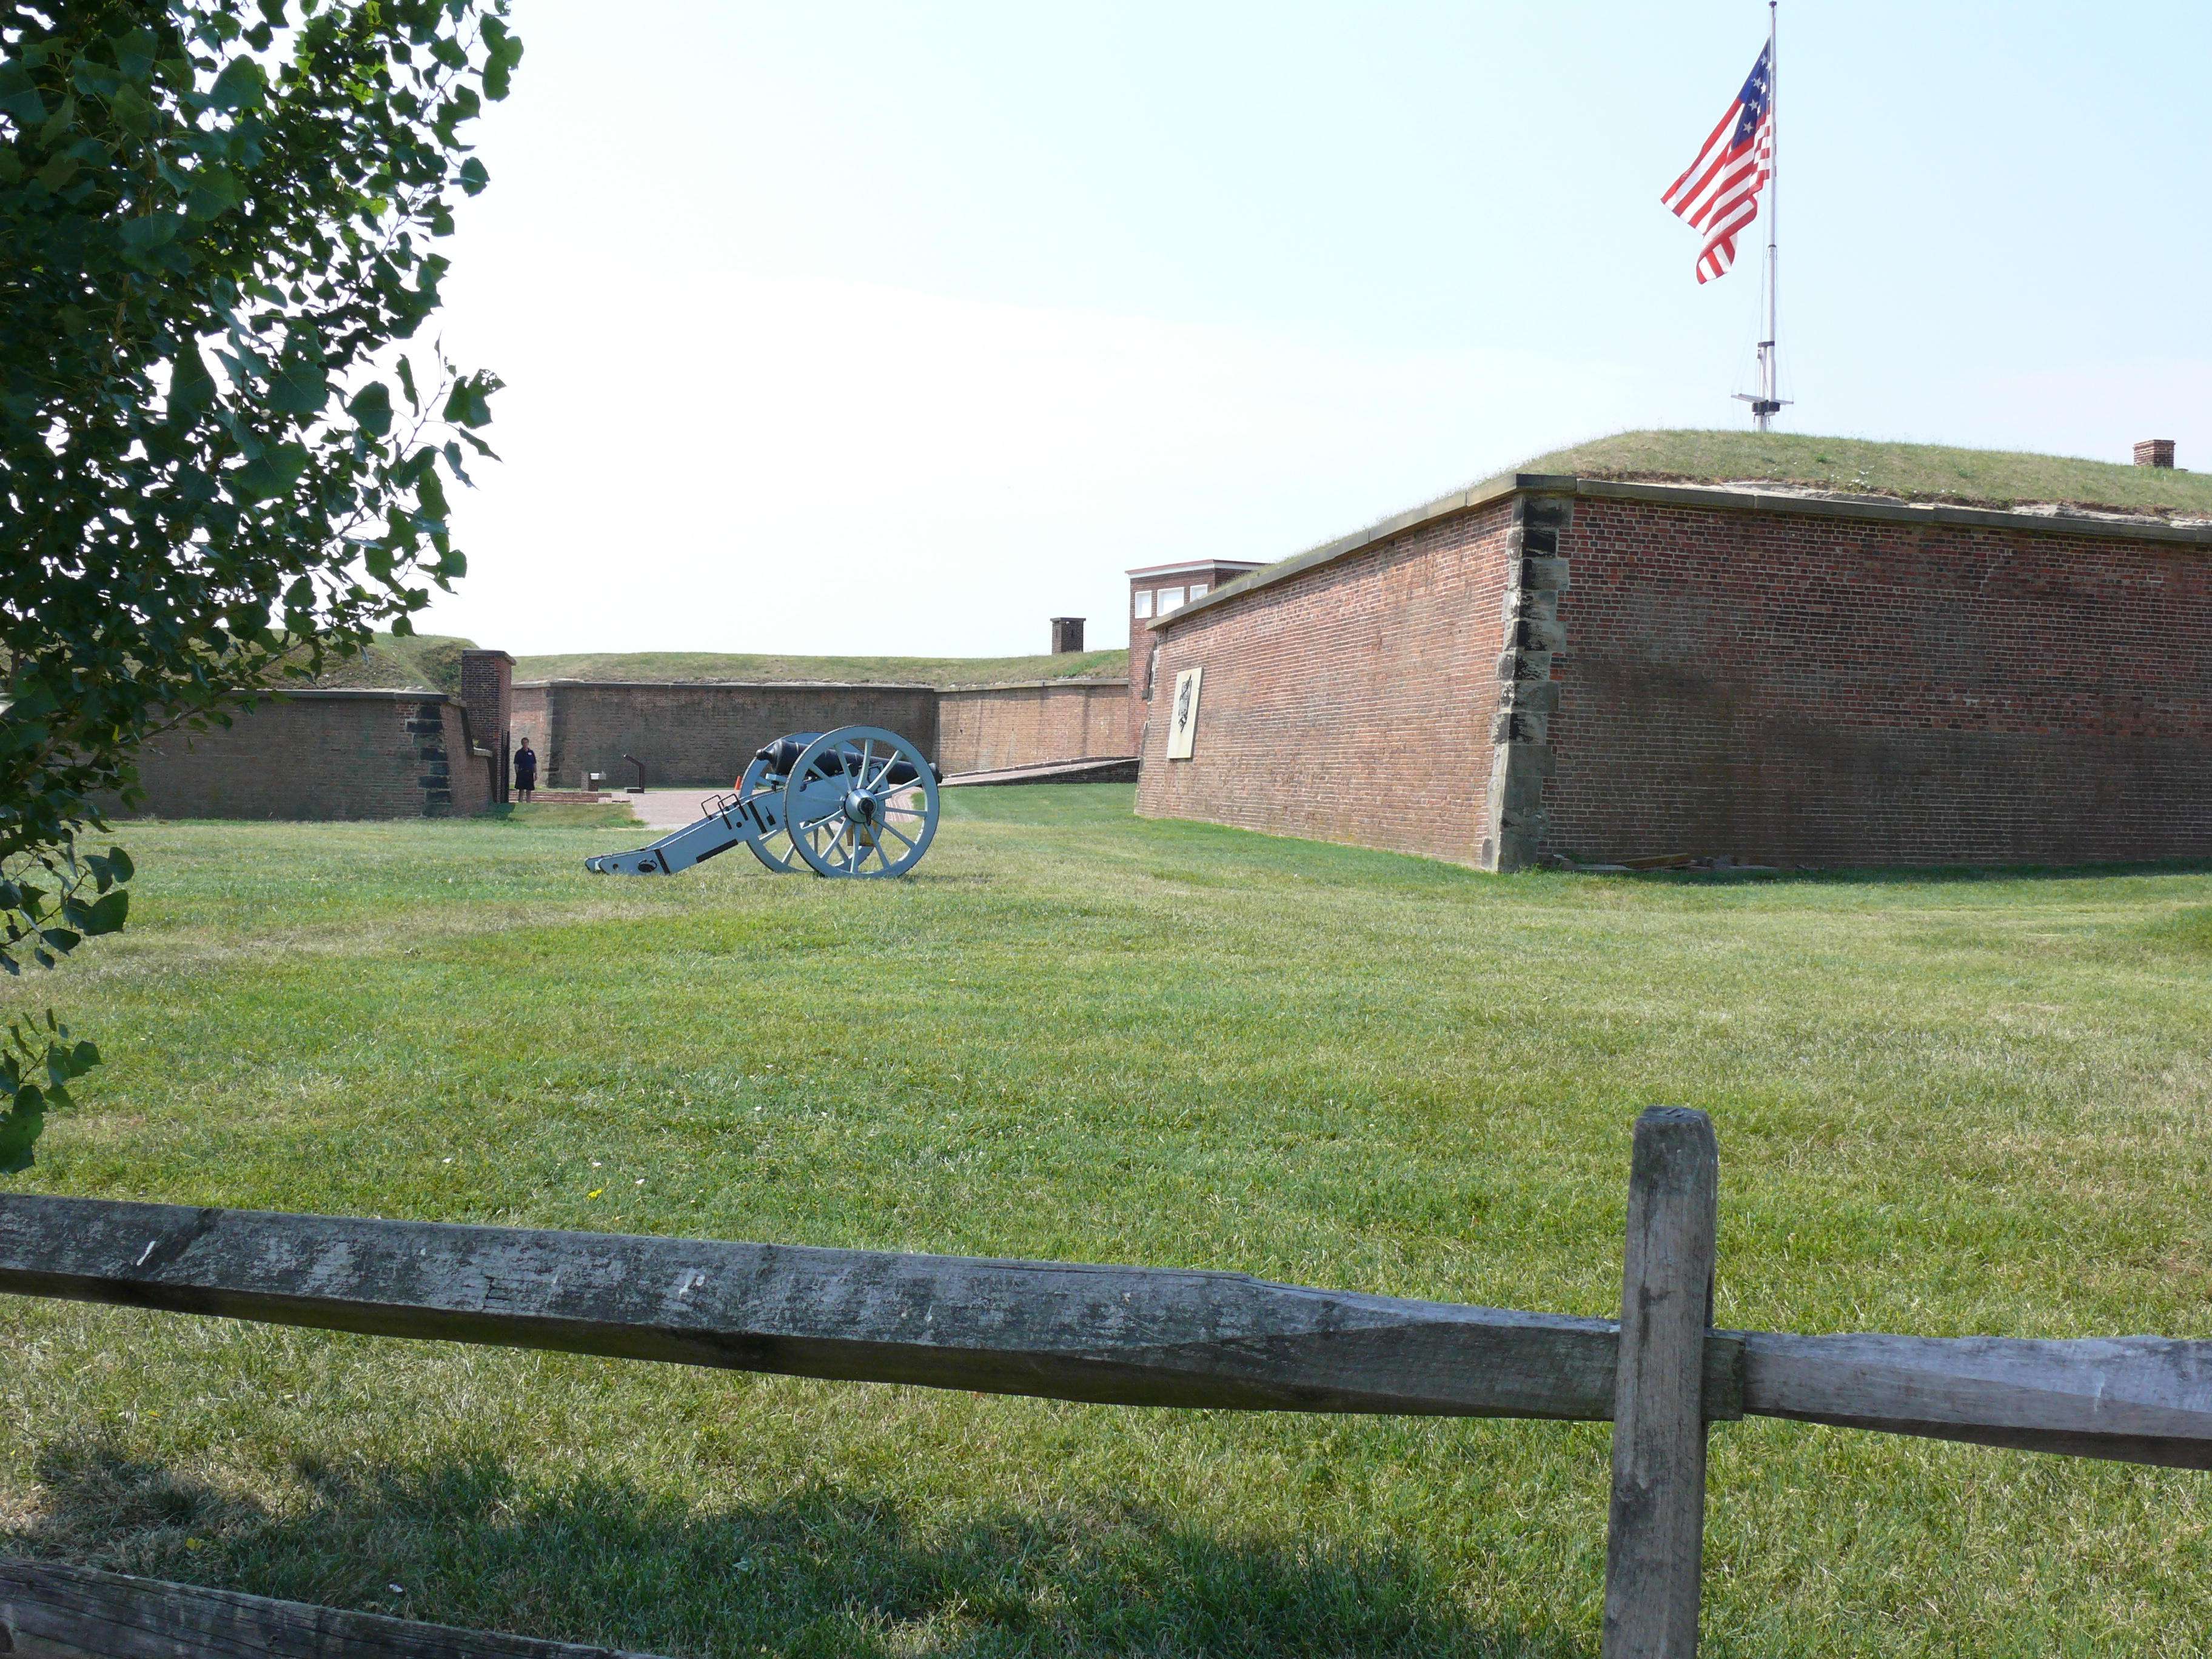 Fort McHenry, Baltimore MD. Photo taken July 18, 2007